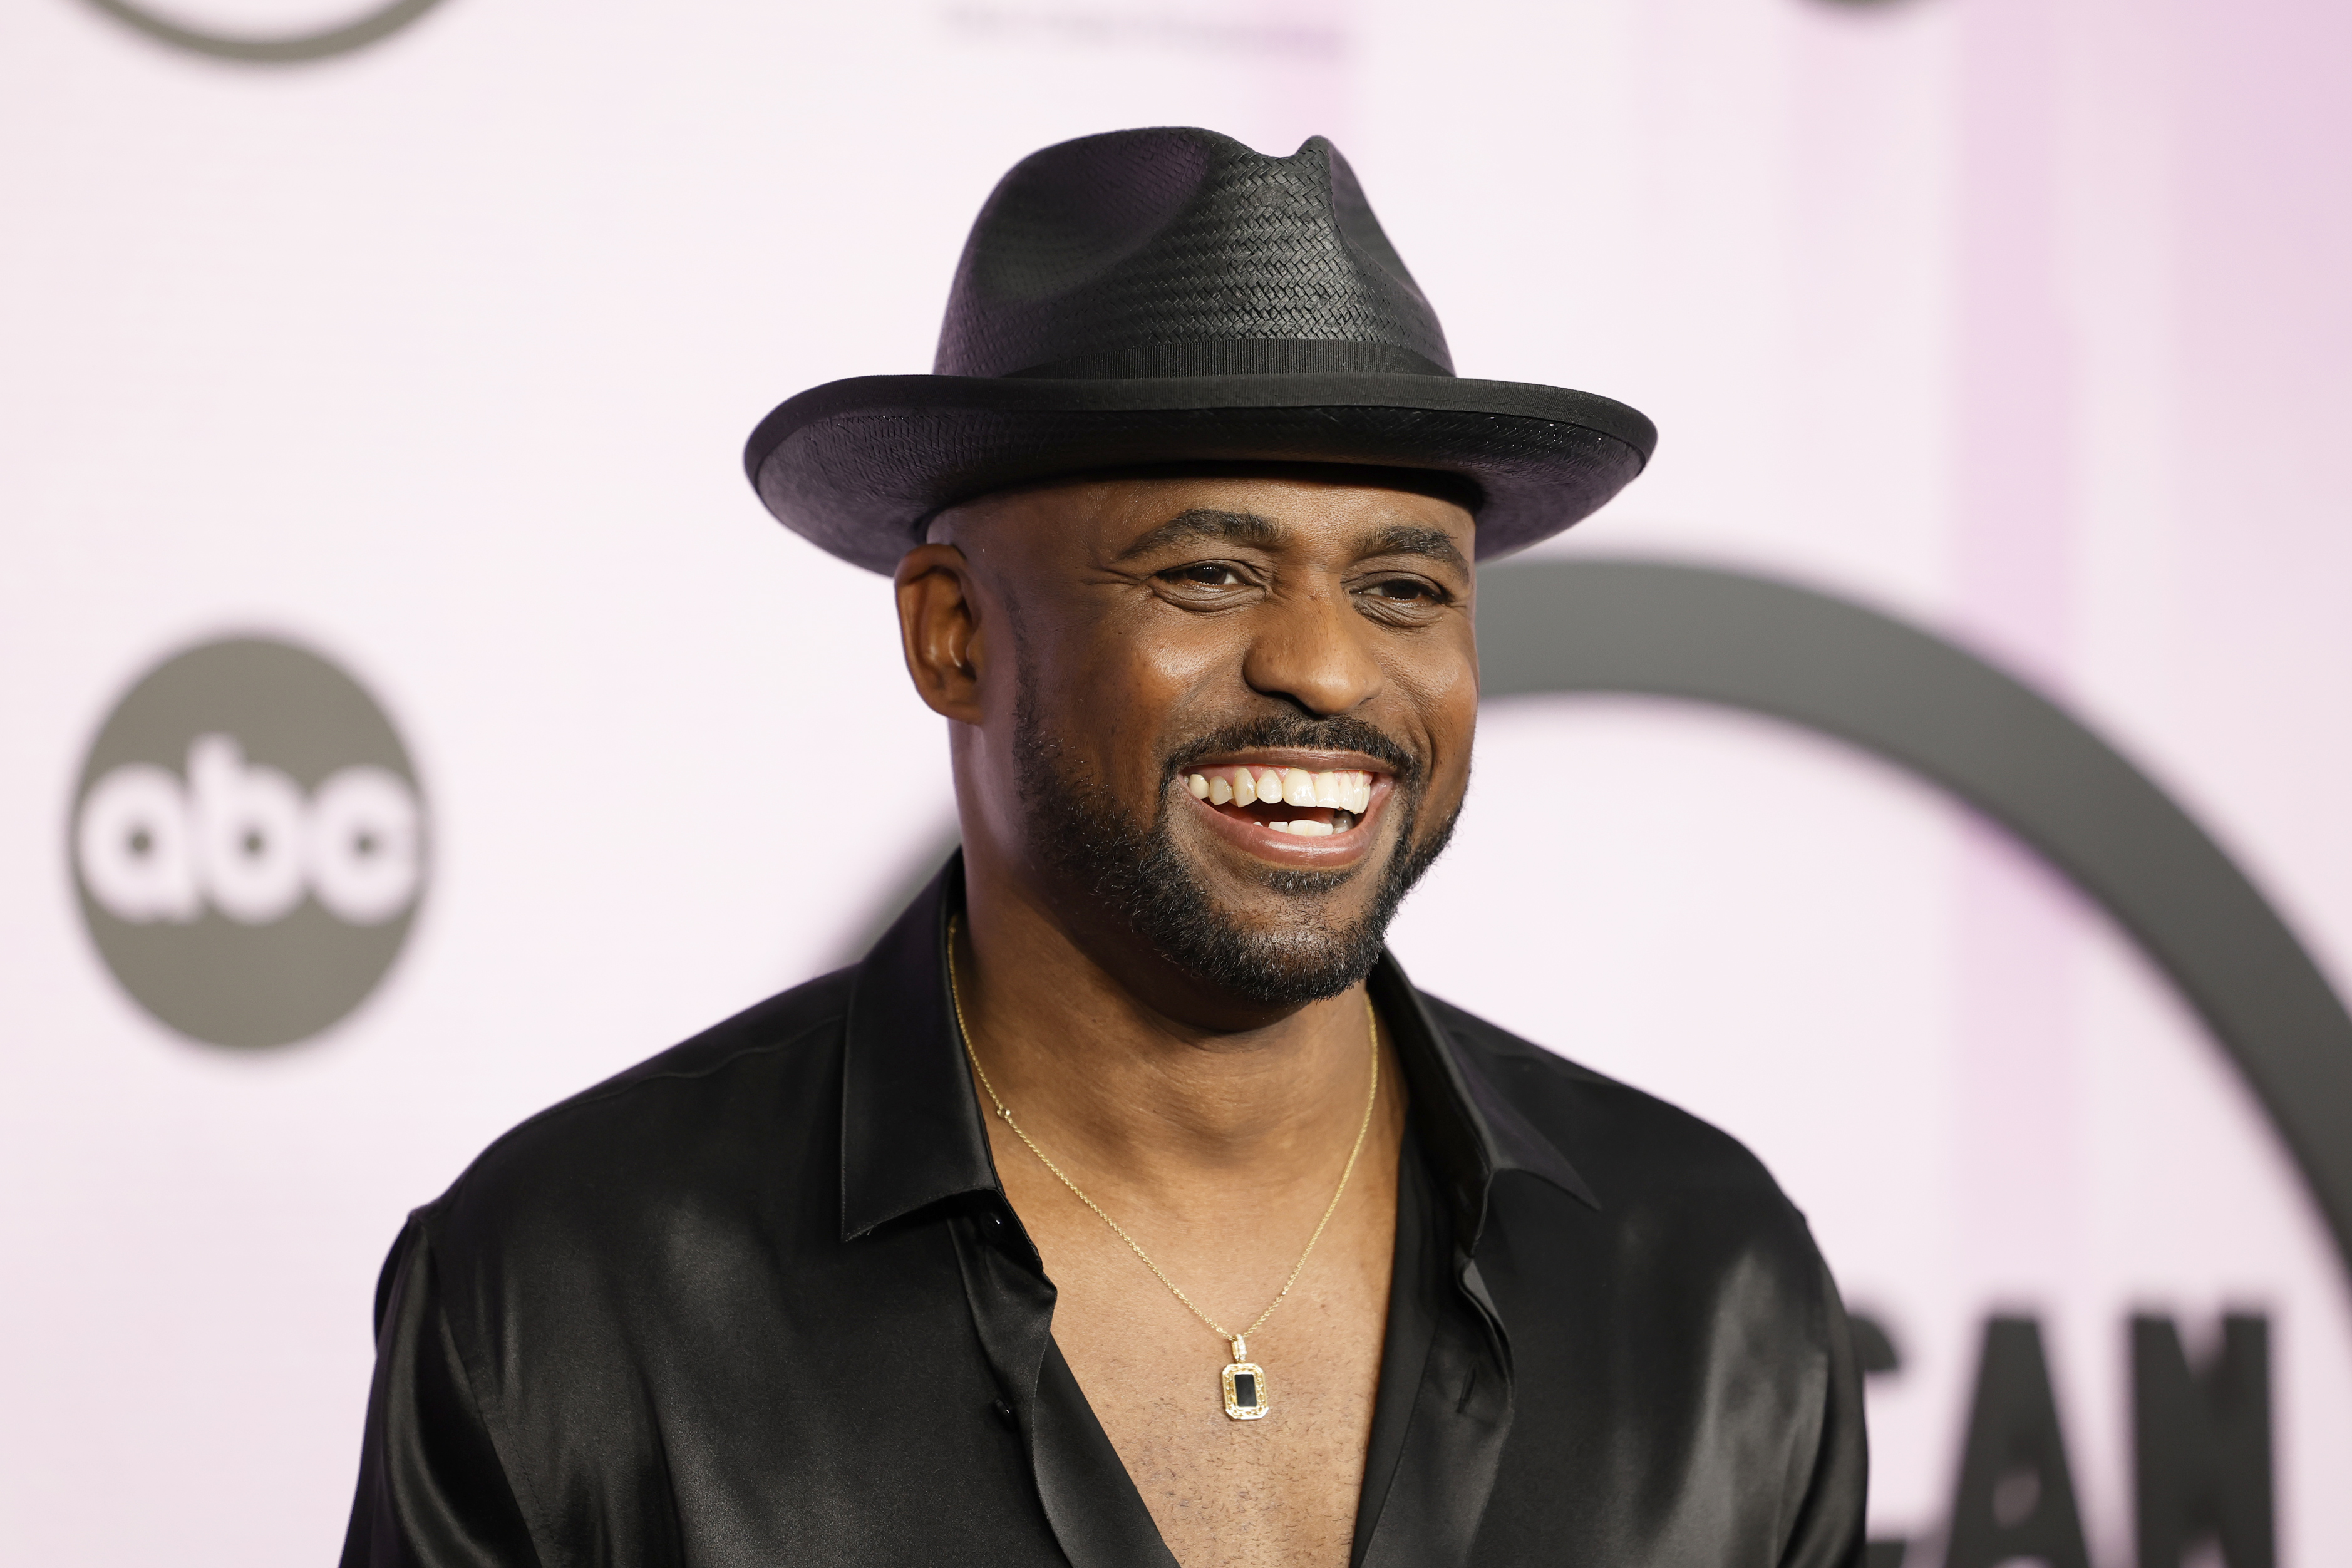 Wayne Brady at the 2022 American Music Awards on November 20, 2022, in Los Angeles, California. | Source: Getty Images